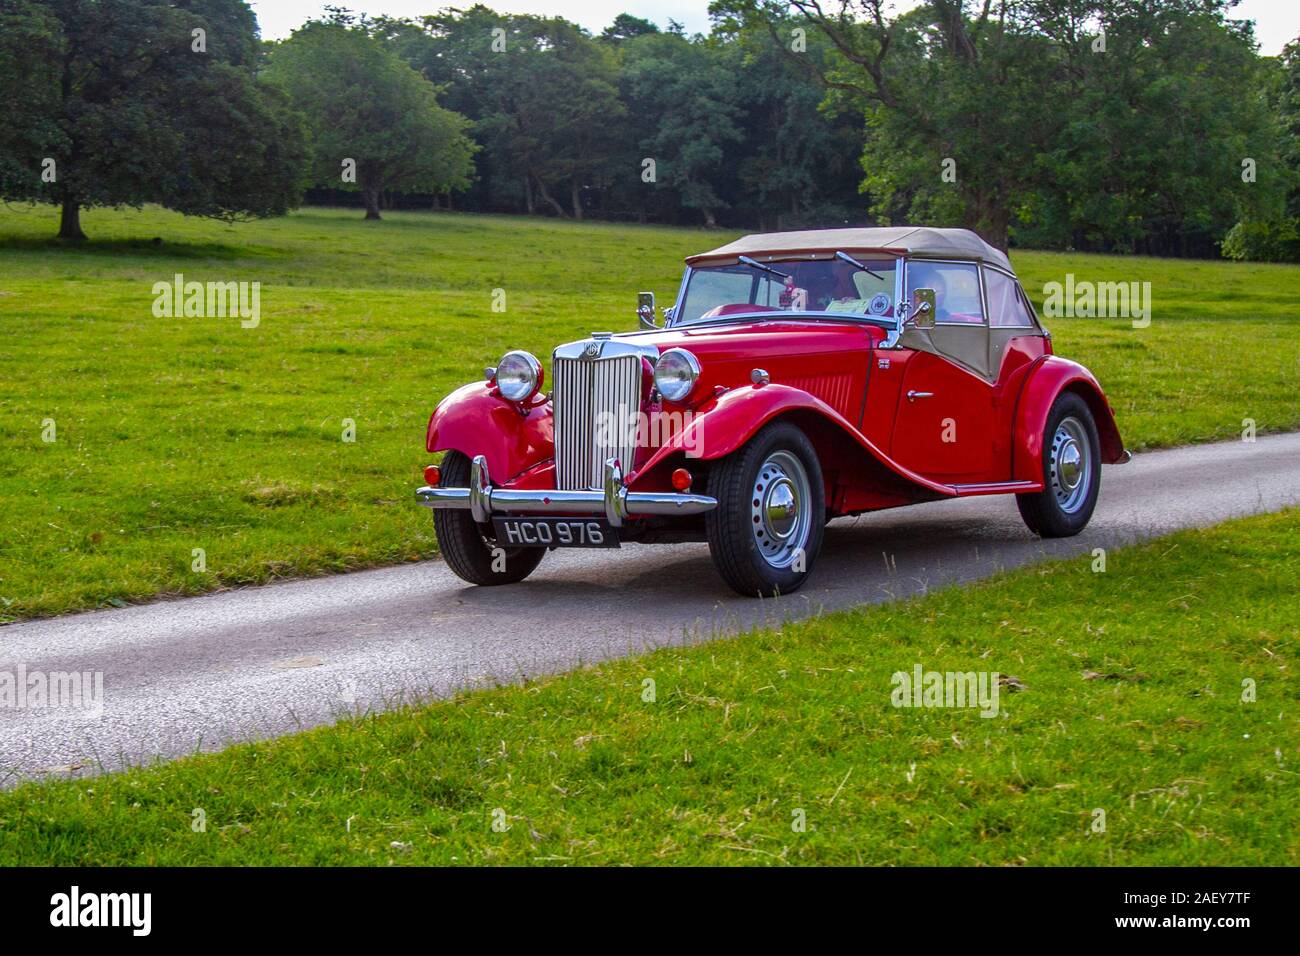 1953 50s red British MG Midget: Vintage classic cars, historics, cherished, old timers, collectable restored vintage veteran, vehicles of yesteryear arriving for the Mark Woodward motoring collector event at Leighton Hall, Carnforth, UK Stock Photo